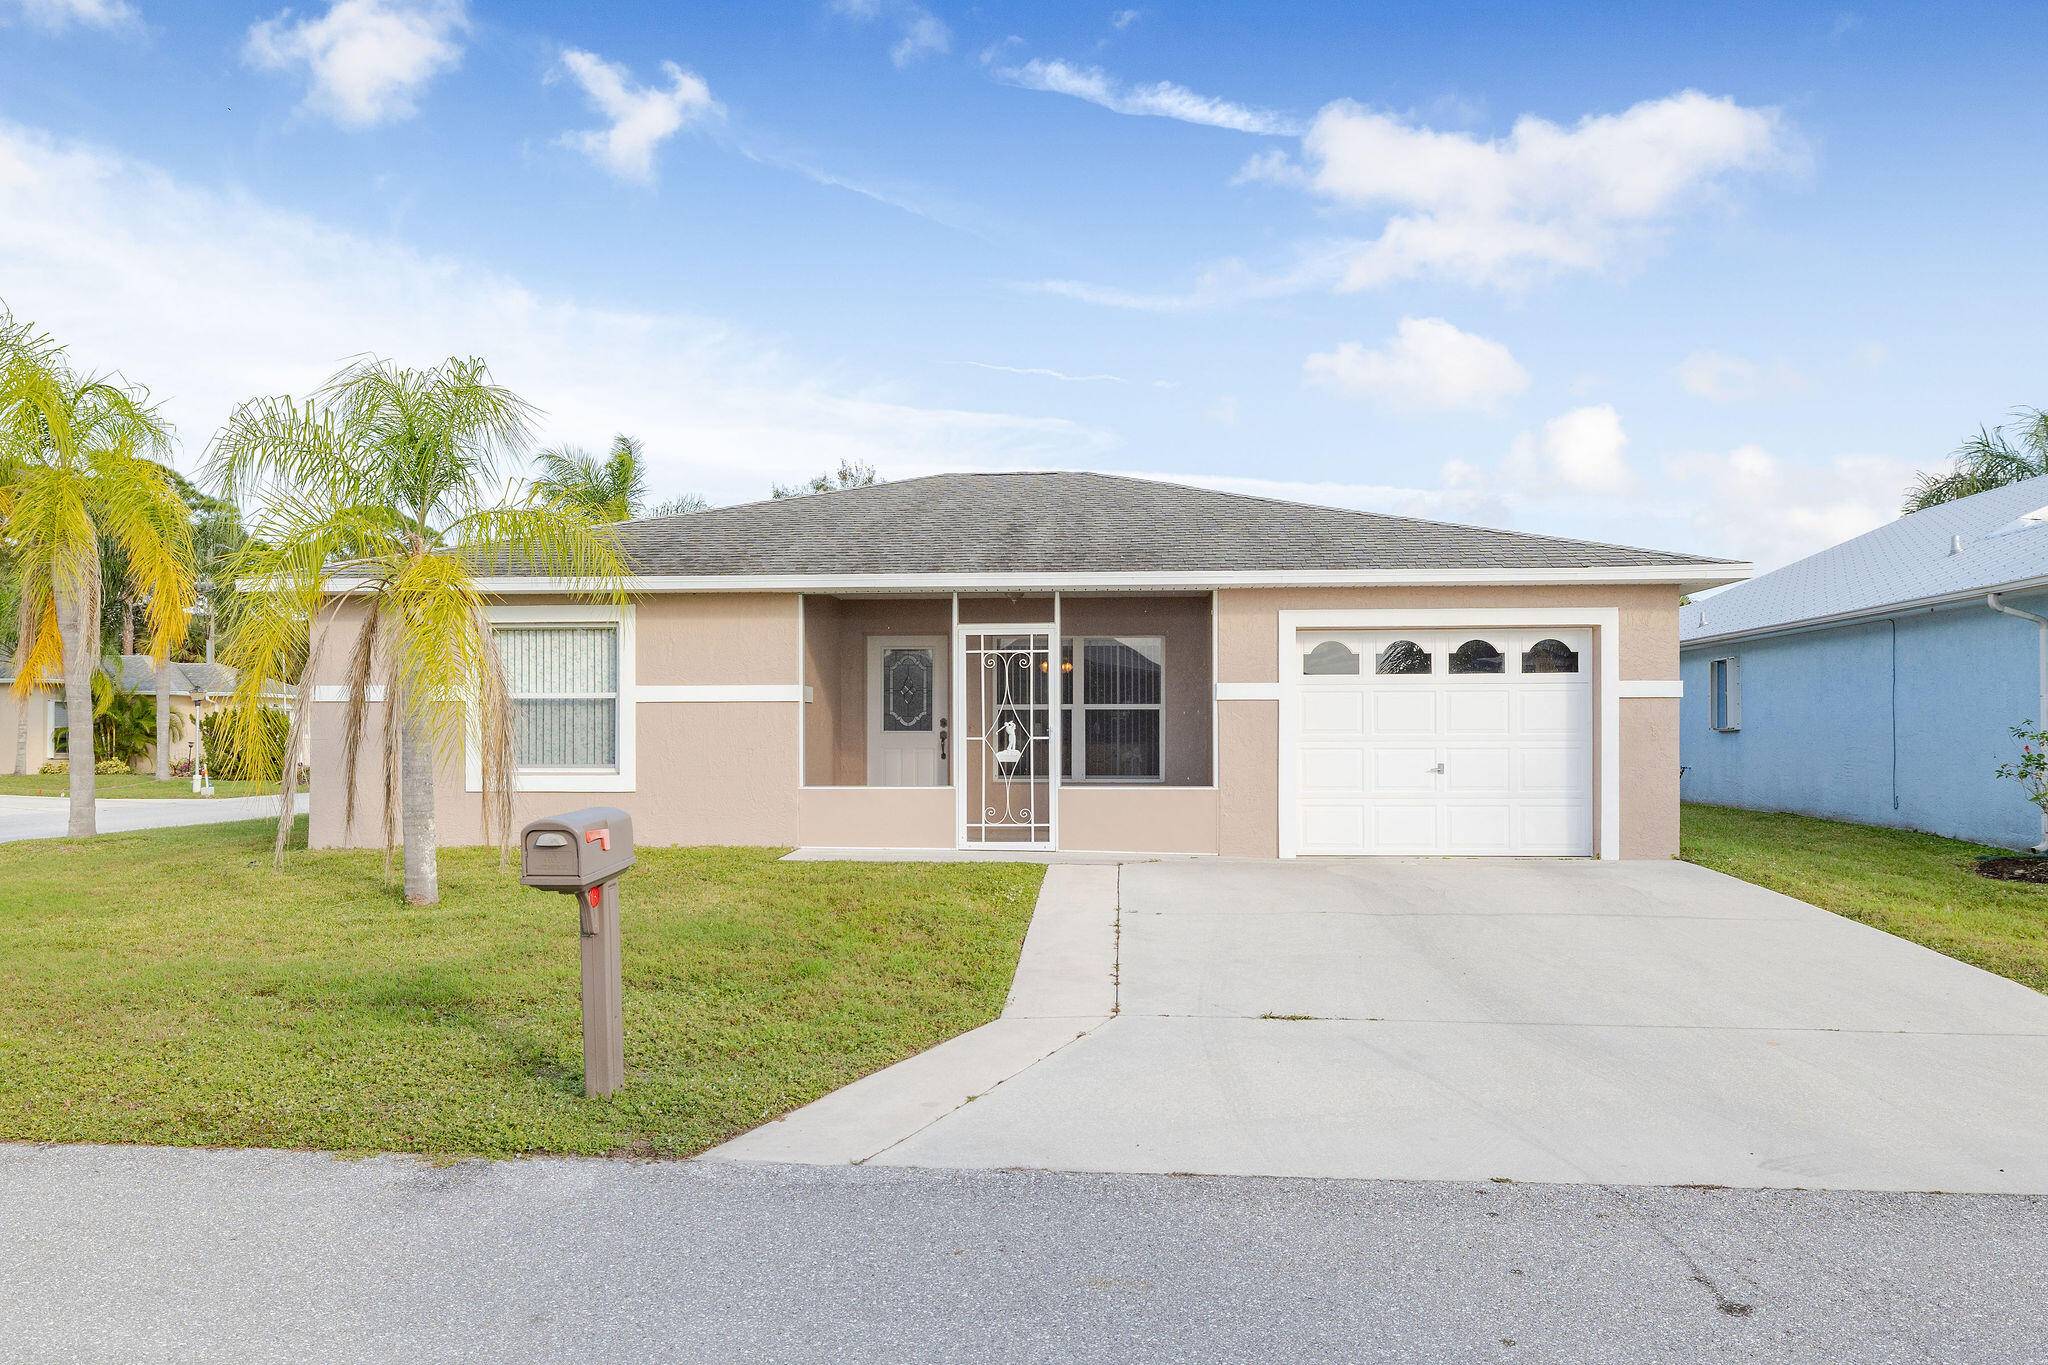 Enjoy this turnkey furnished home with all the amenities to a wonderful community with a care free and active living.